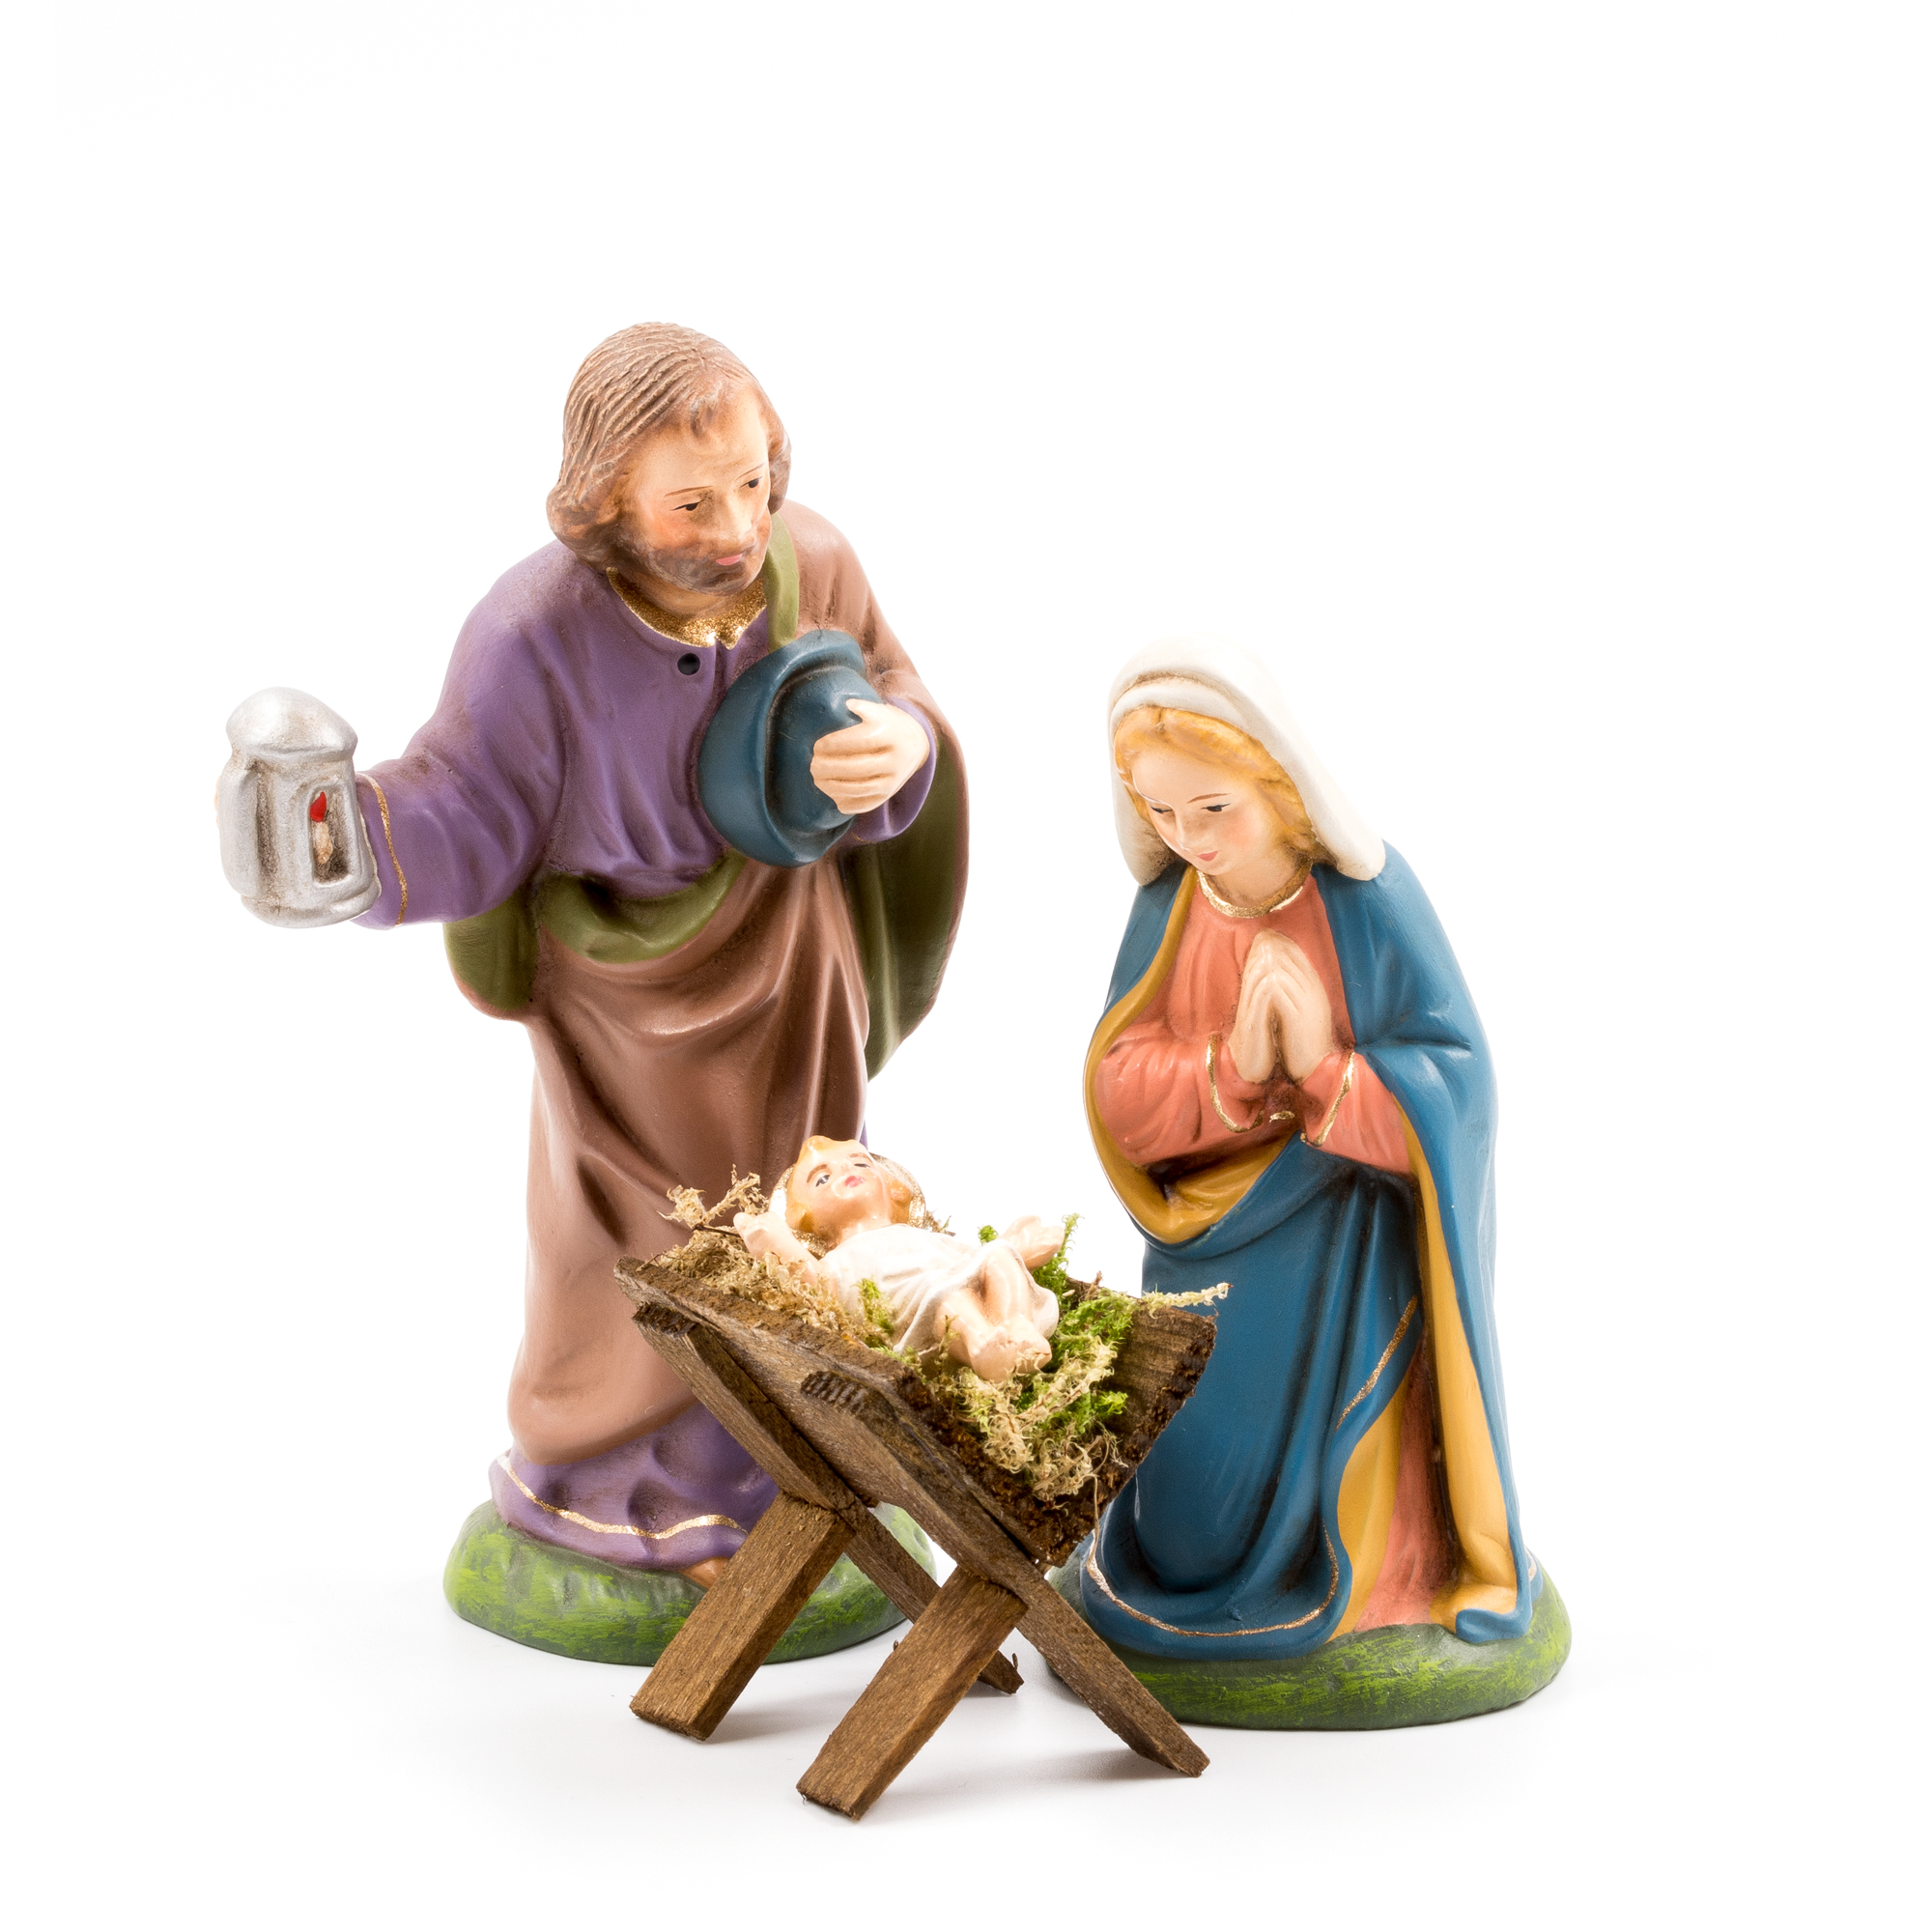 Holy Family - 3 figures, to 4.5 in. figures